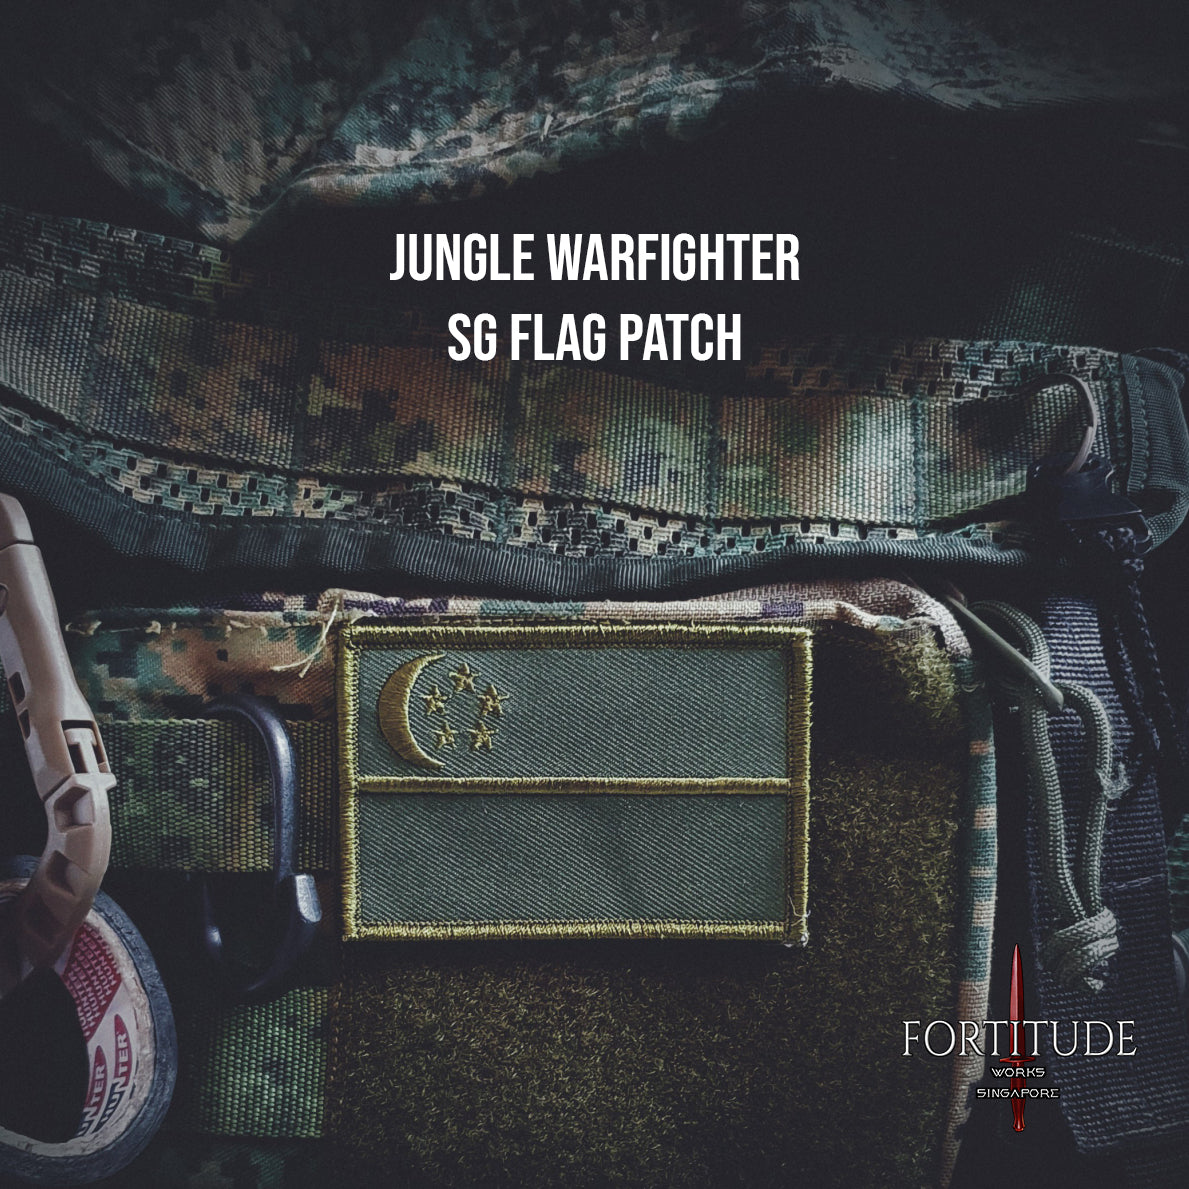 JUNGLE WARFIGHTER SG FLAG PATCH - FORTITUDE WORKS SINGAPORE